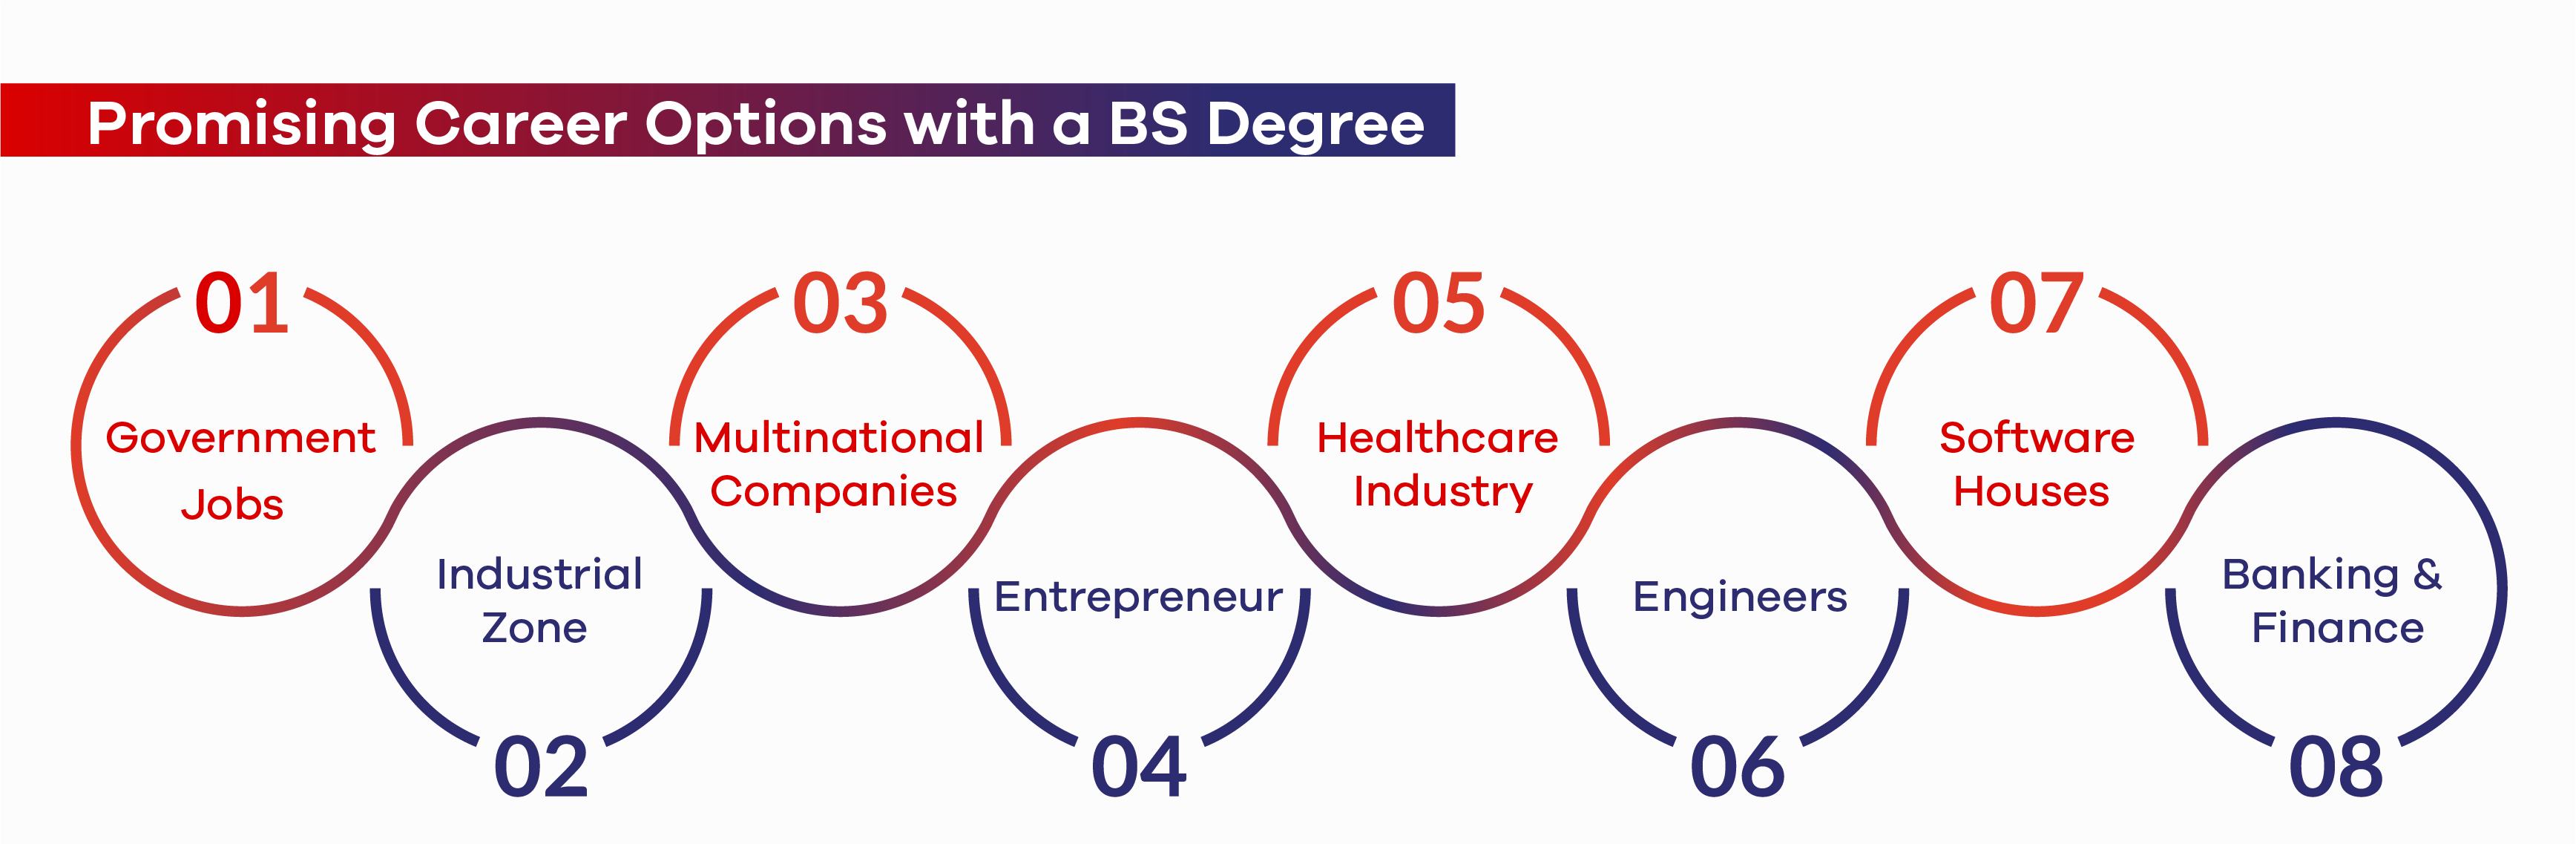 Career Options with a BS Degree